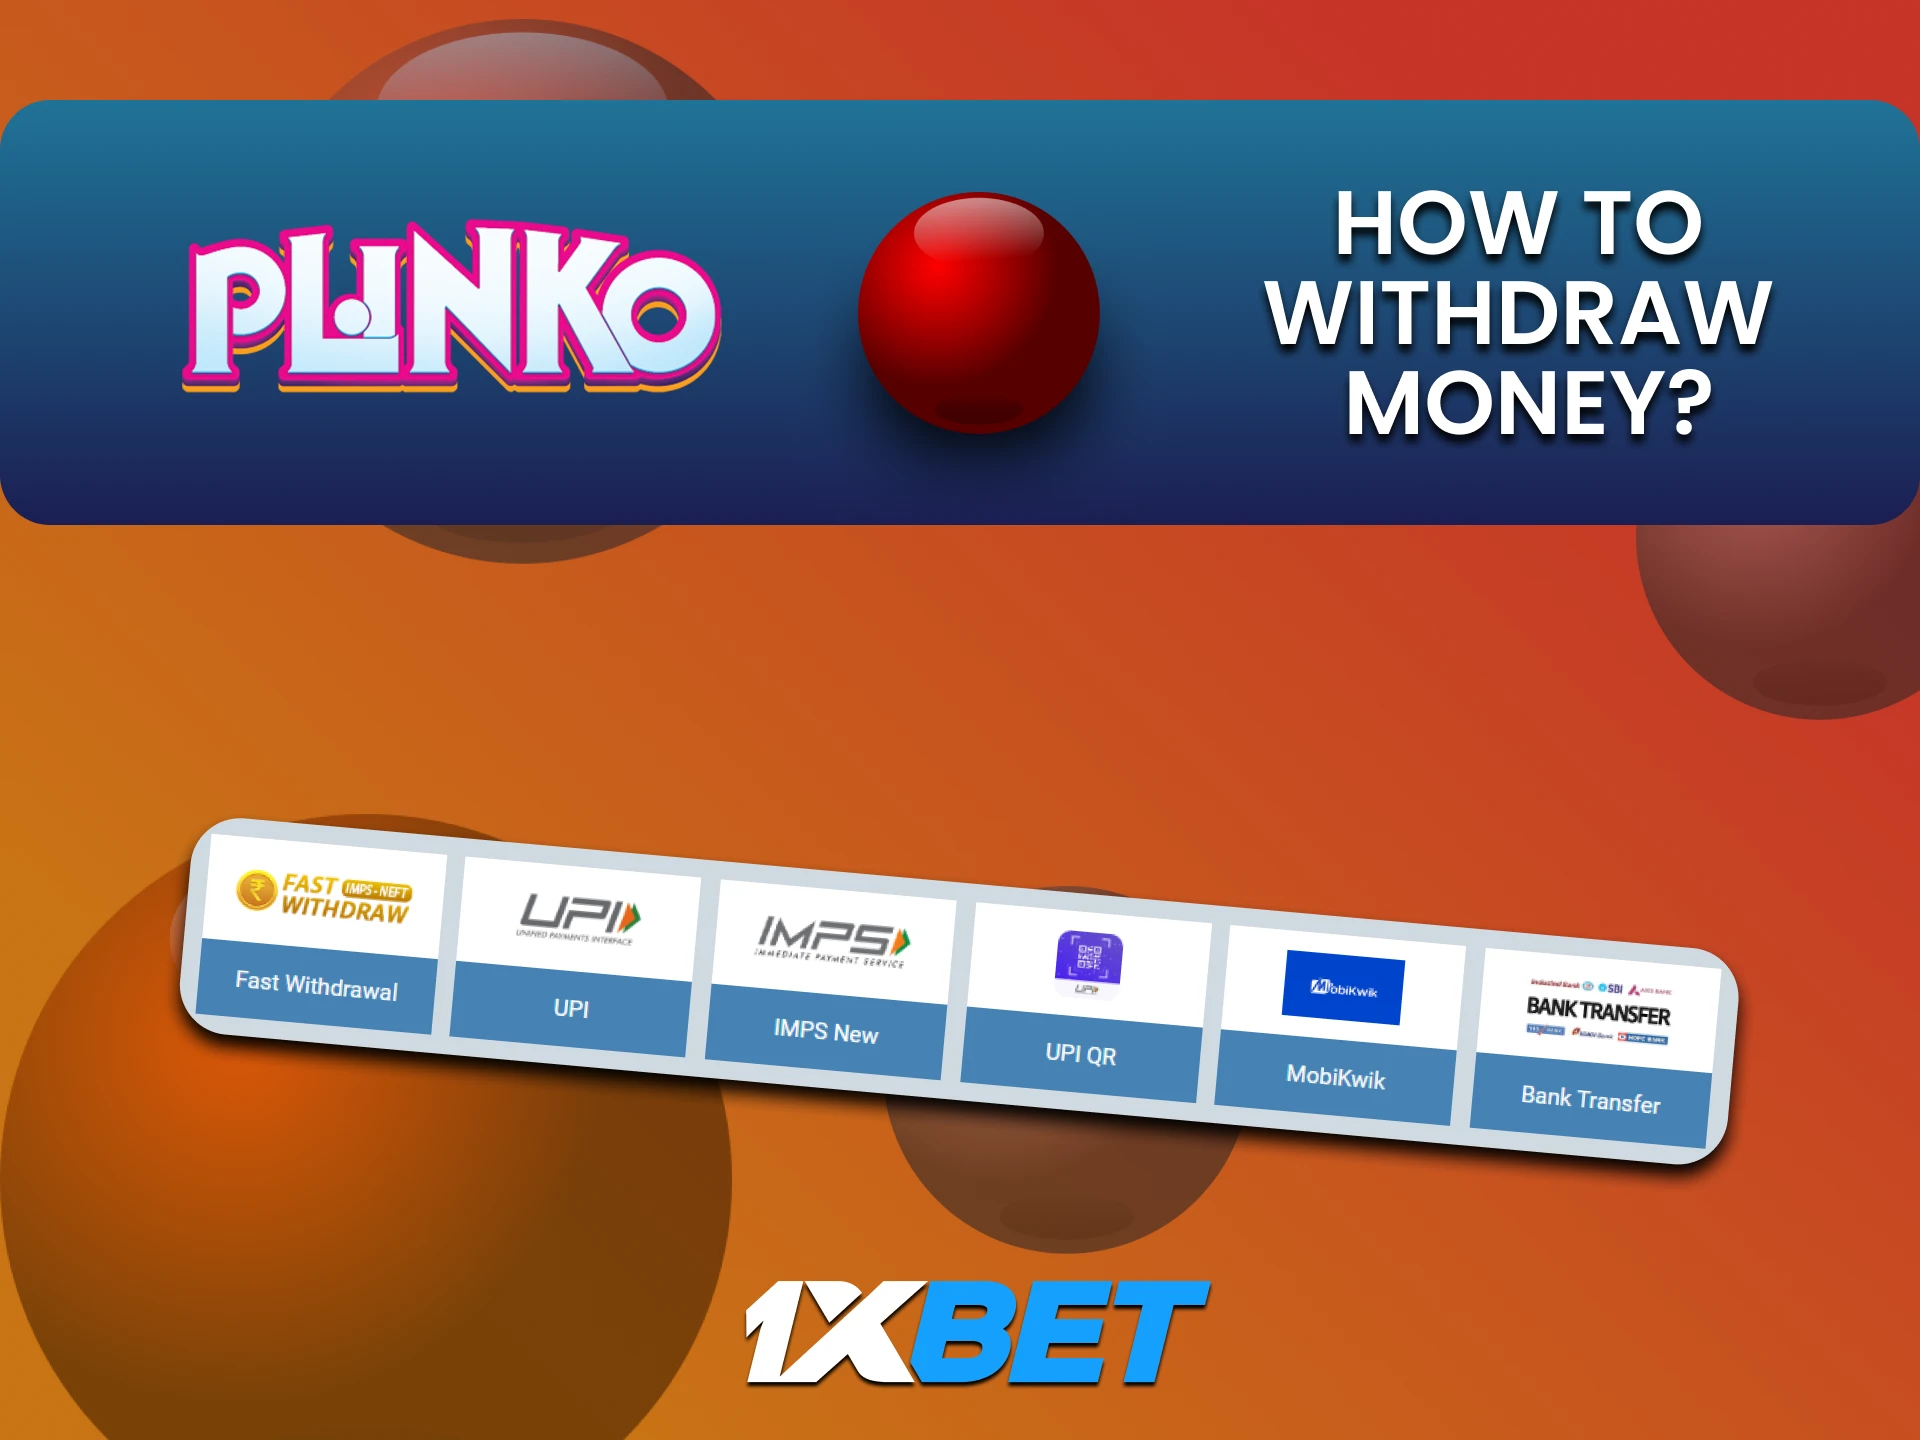 Find out about withdrawal methods for Plinko on 1xbet.